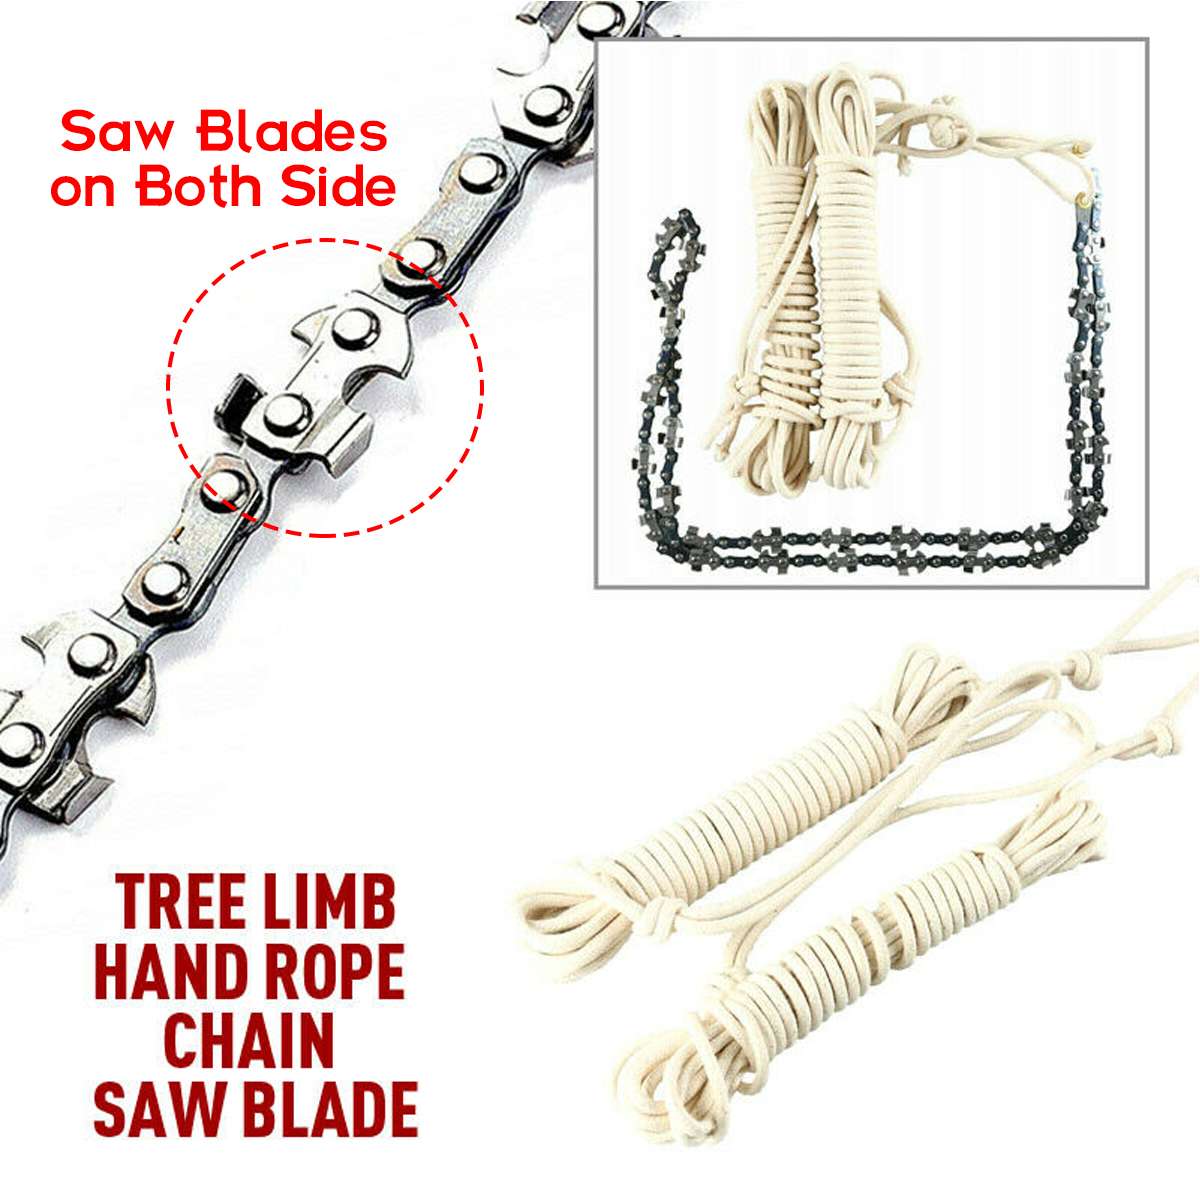 48 Inch High Reach Rope Chain Saw Tool Kit 64 Sections 42 Blades Cutter on Both Sides Outdoor Wood Cutting Camping Tool